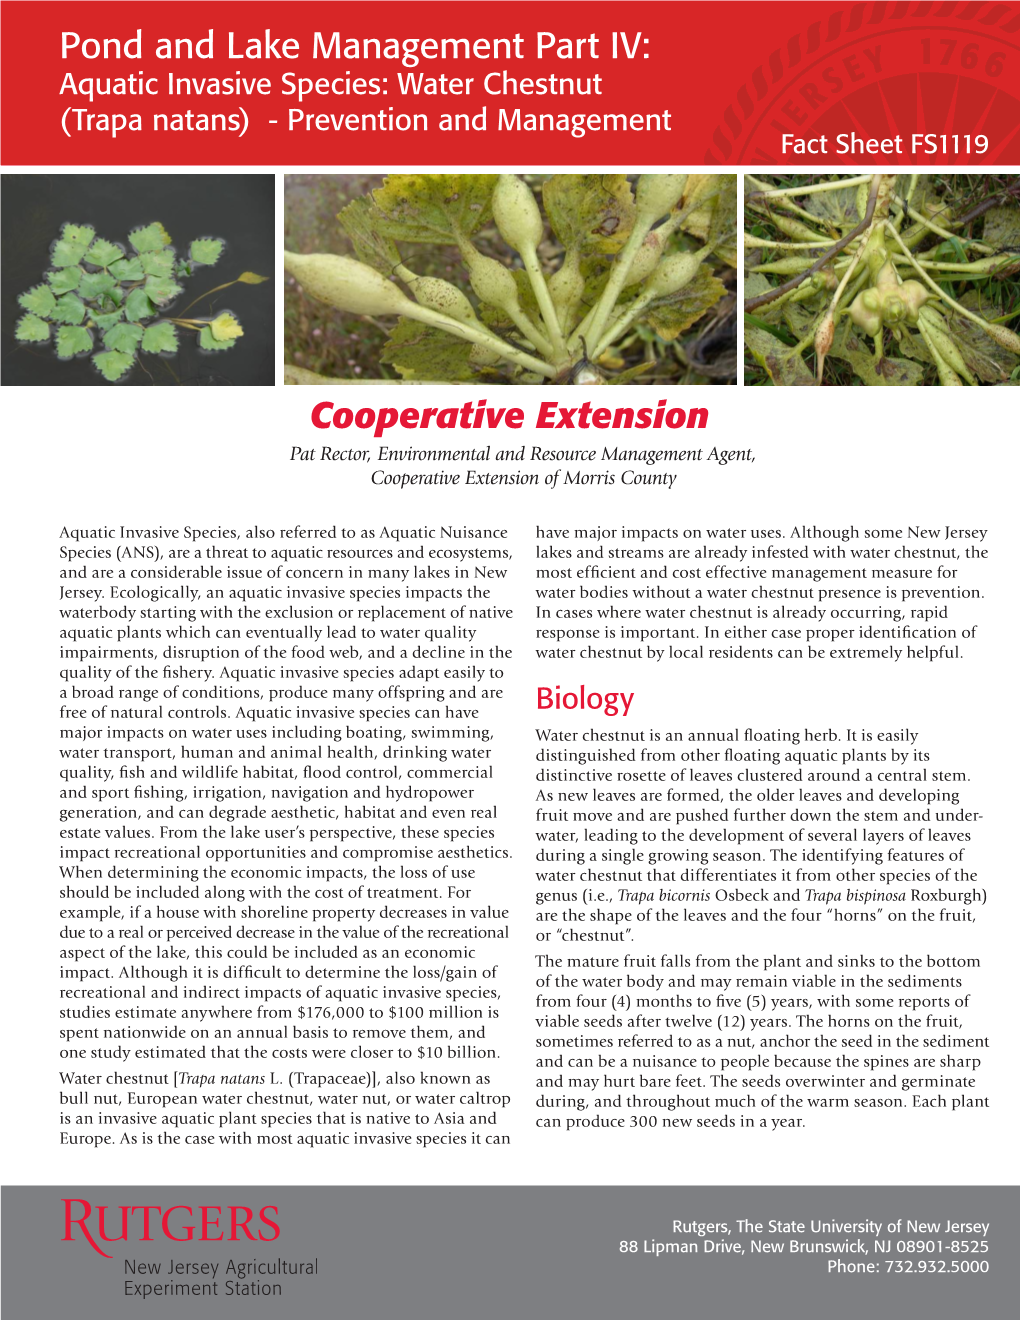 Pond and Lake Management Part IV: Aquatic Invasive Species: Water Chestnut (Trapa Natans) - Prevention and Management Fact Sheet FS1119